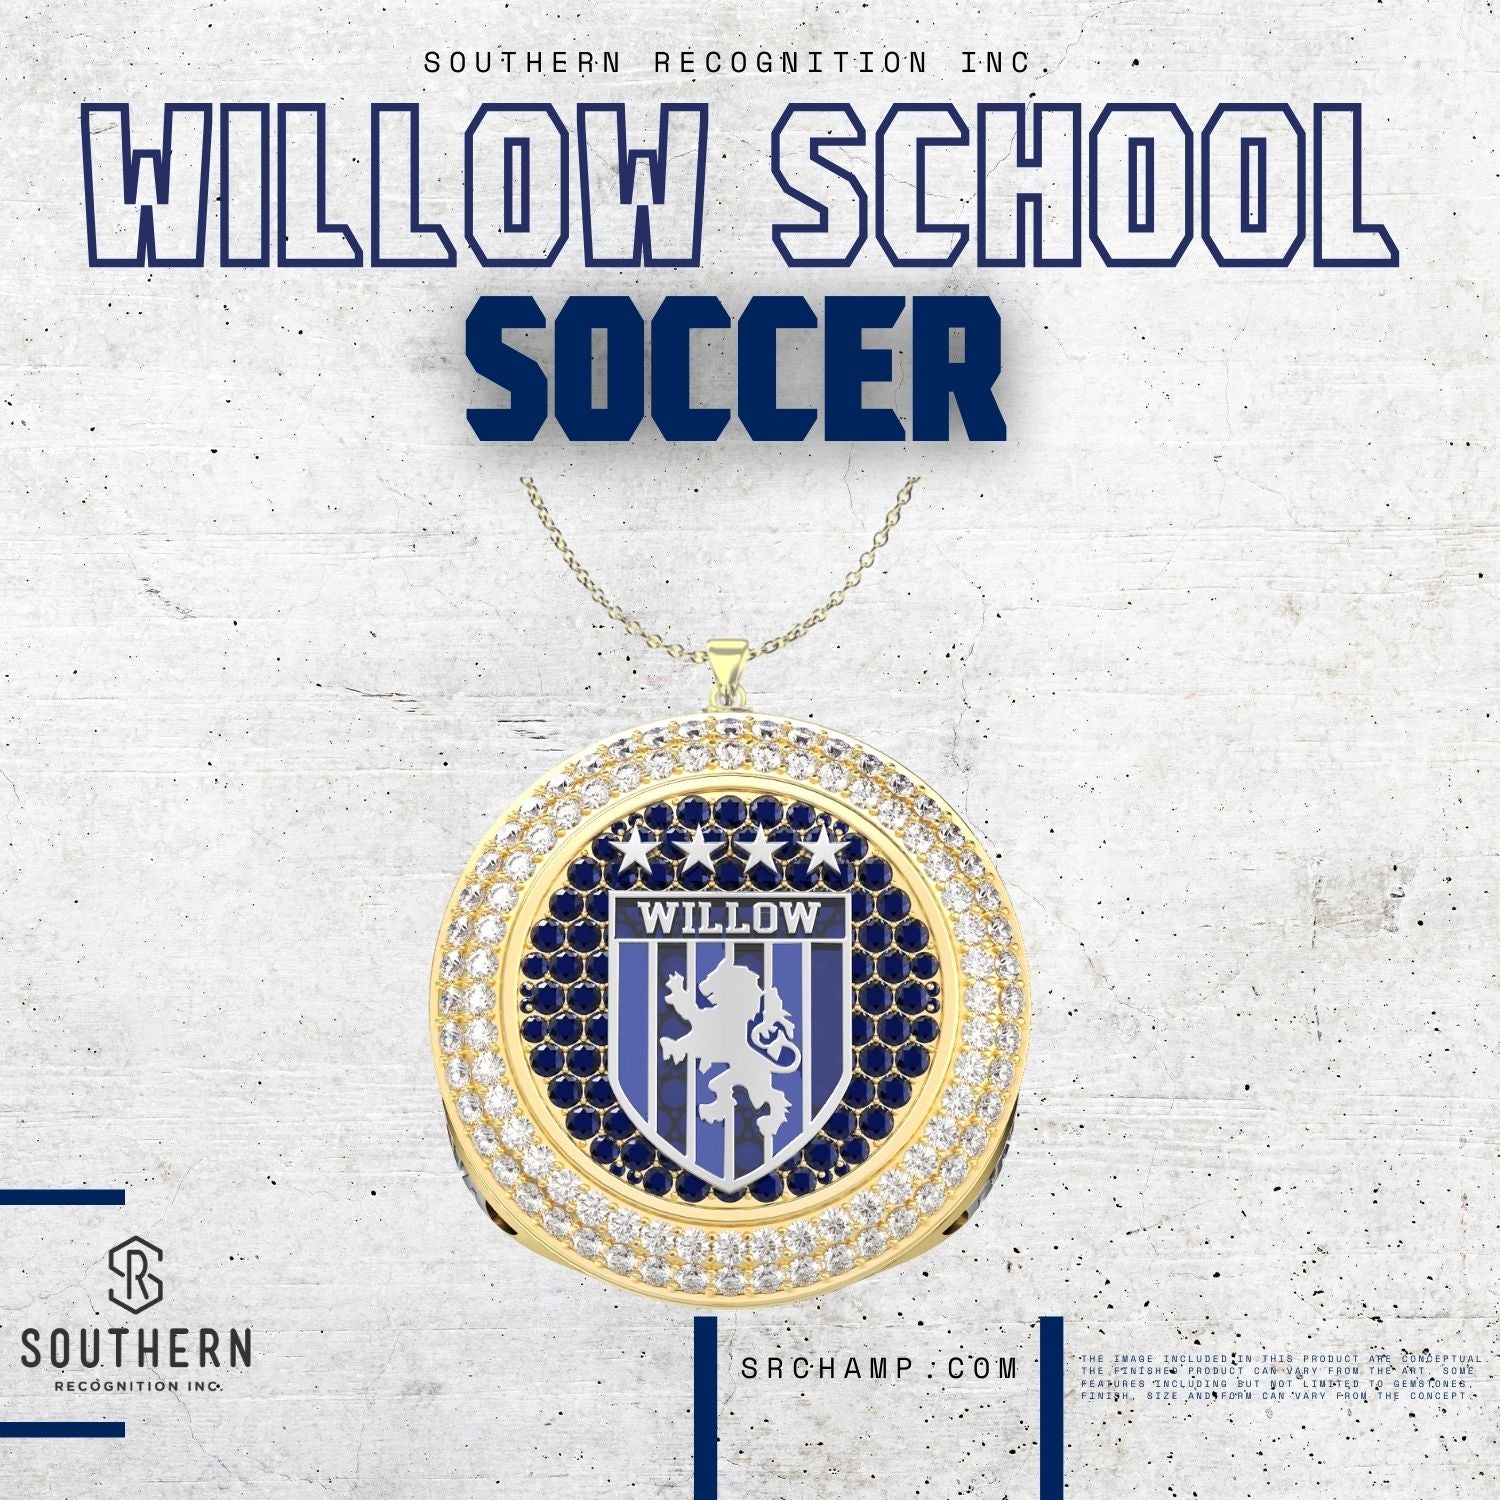 The Willow School Soccer 2024 State Championship Pendant